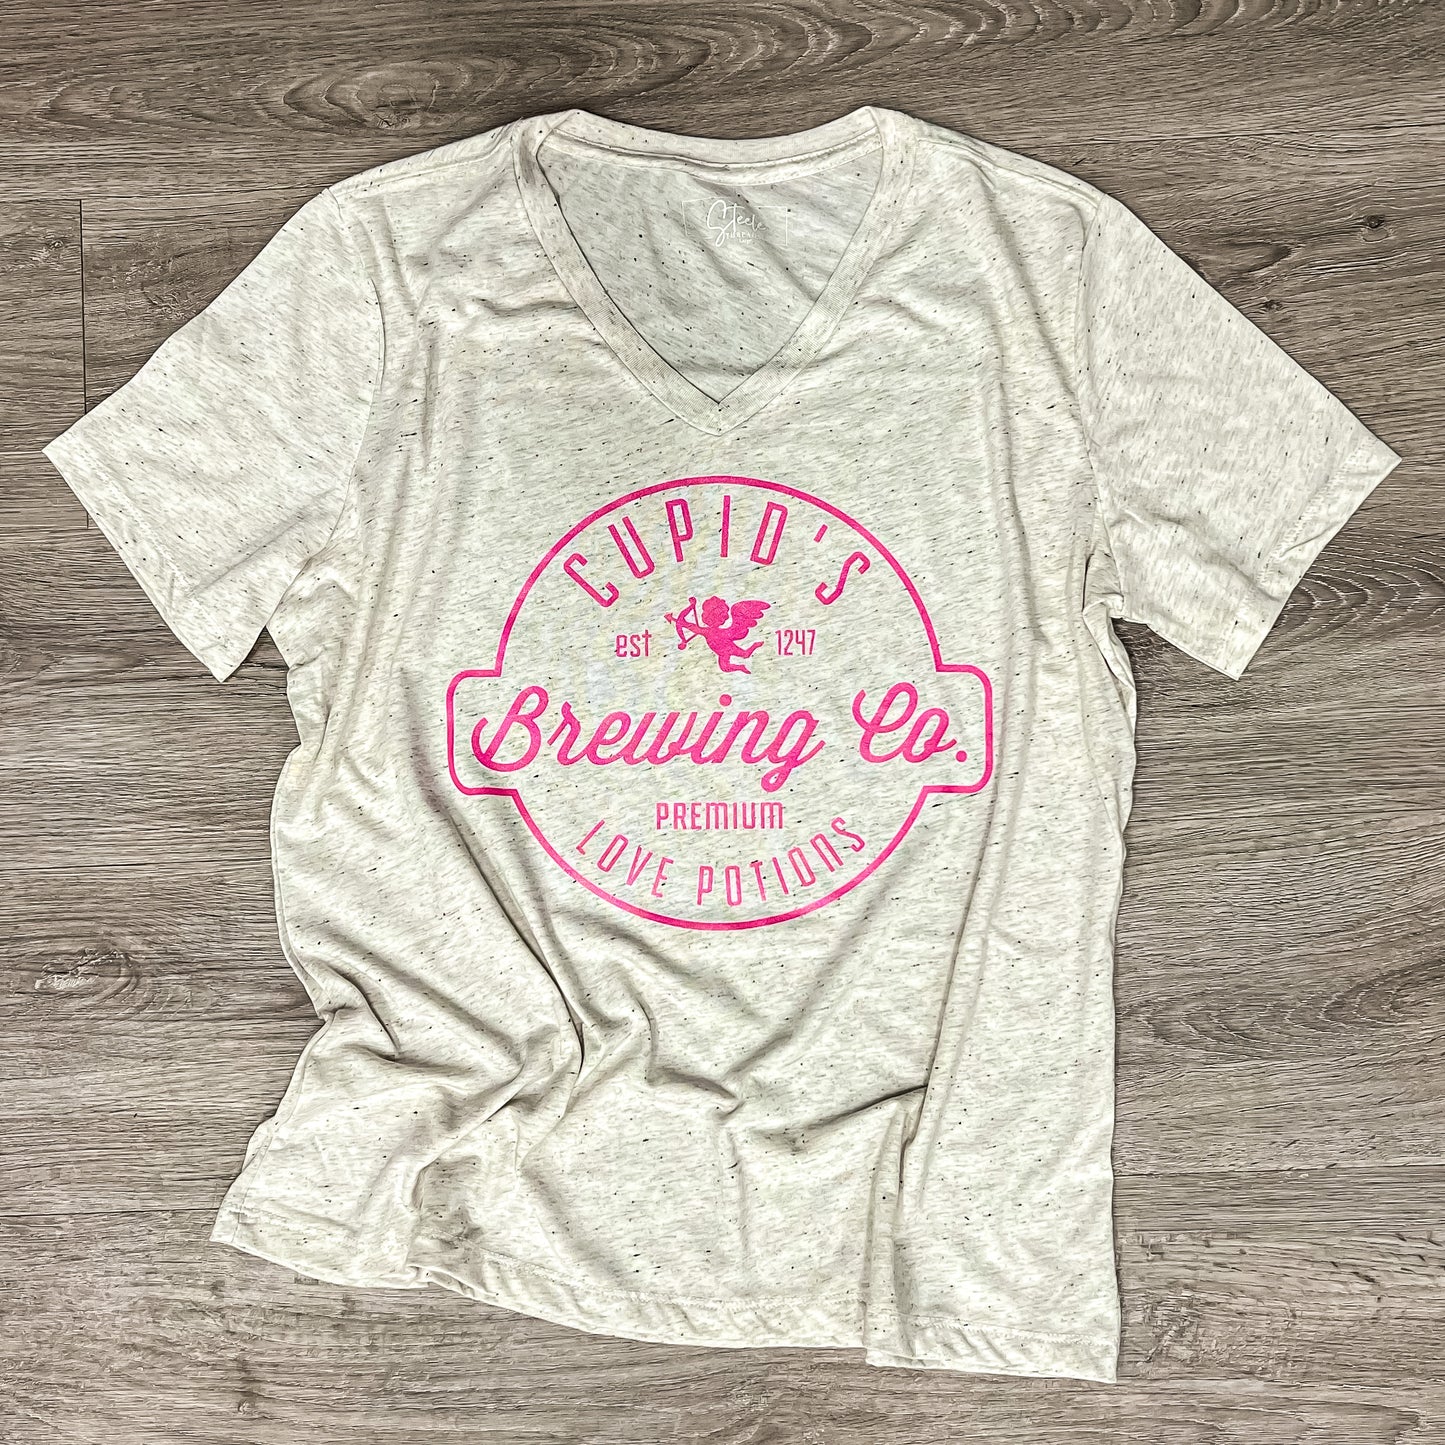 Cupid's Brewing Co. Tee- Oatmeal V-neck